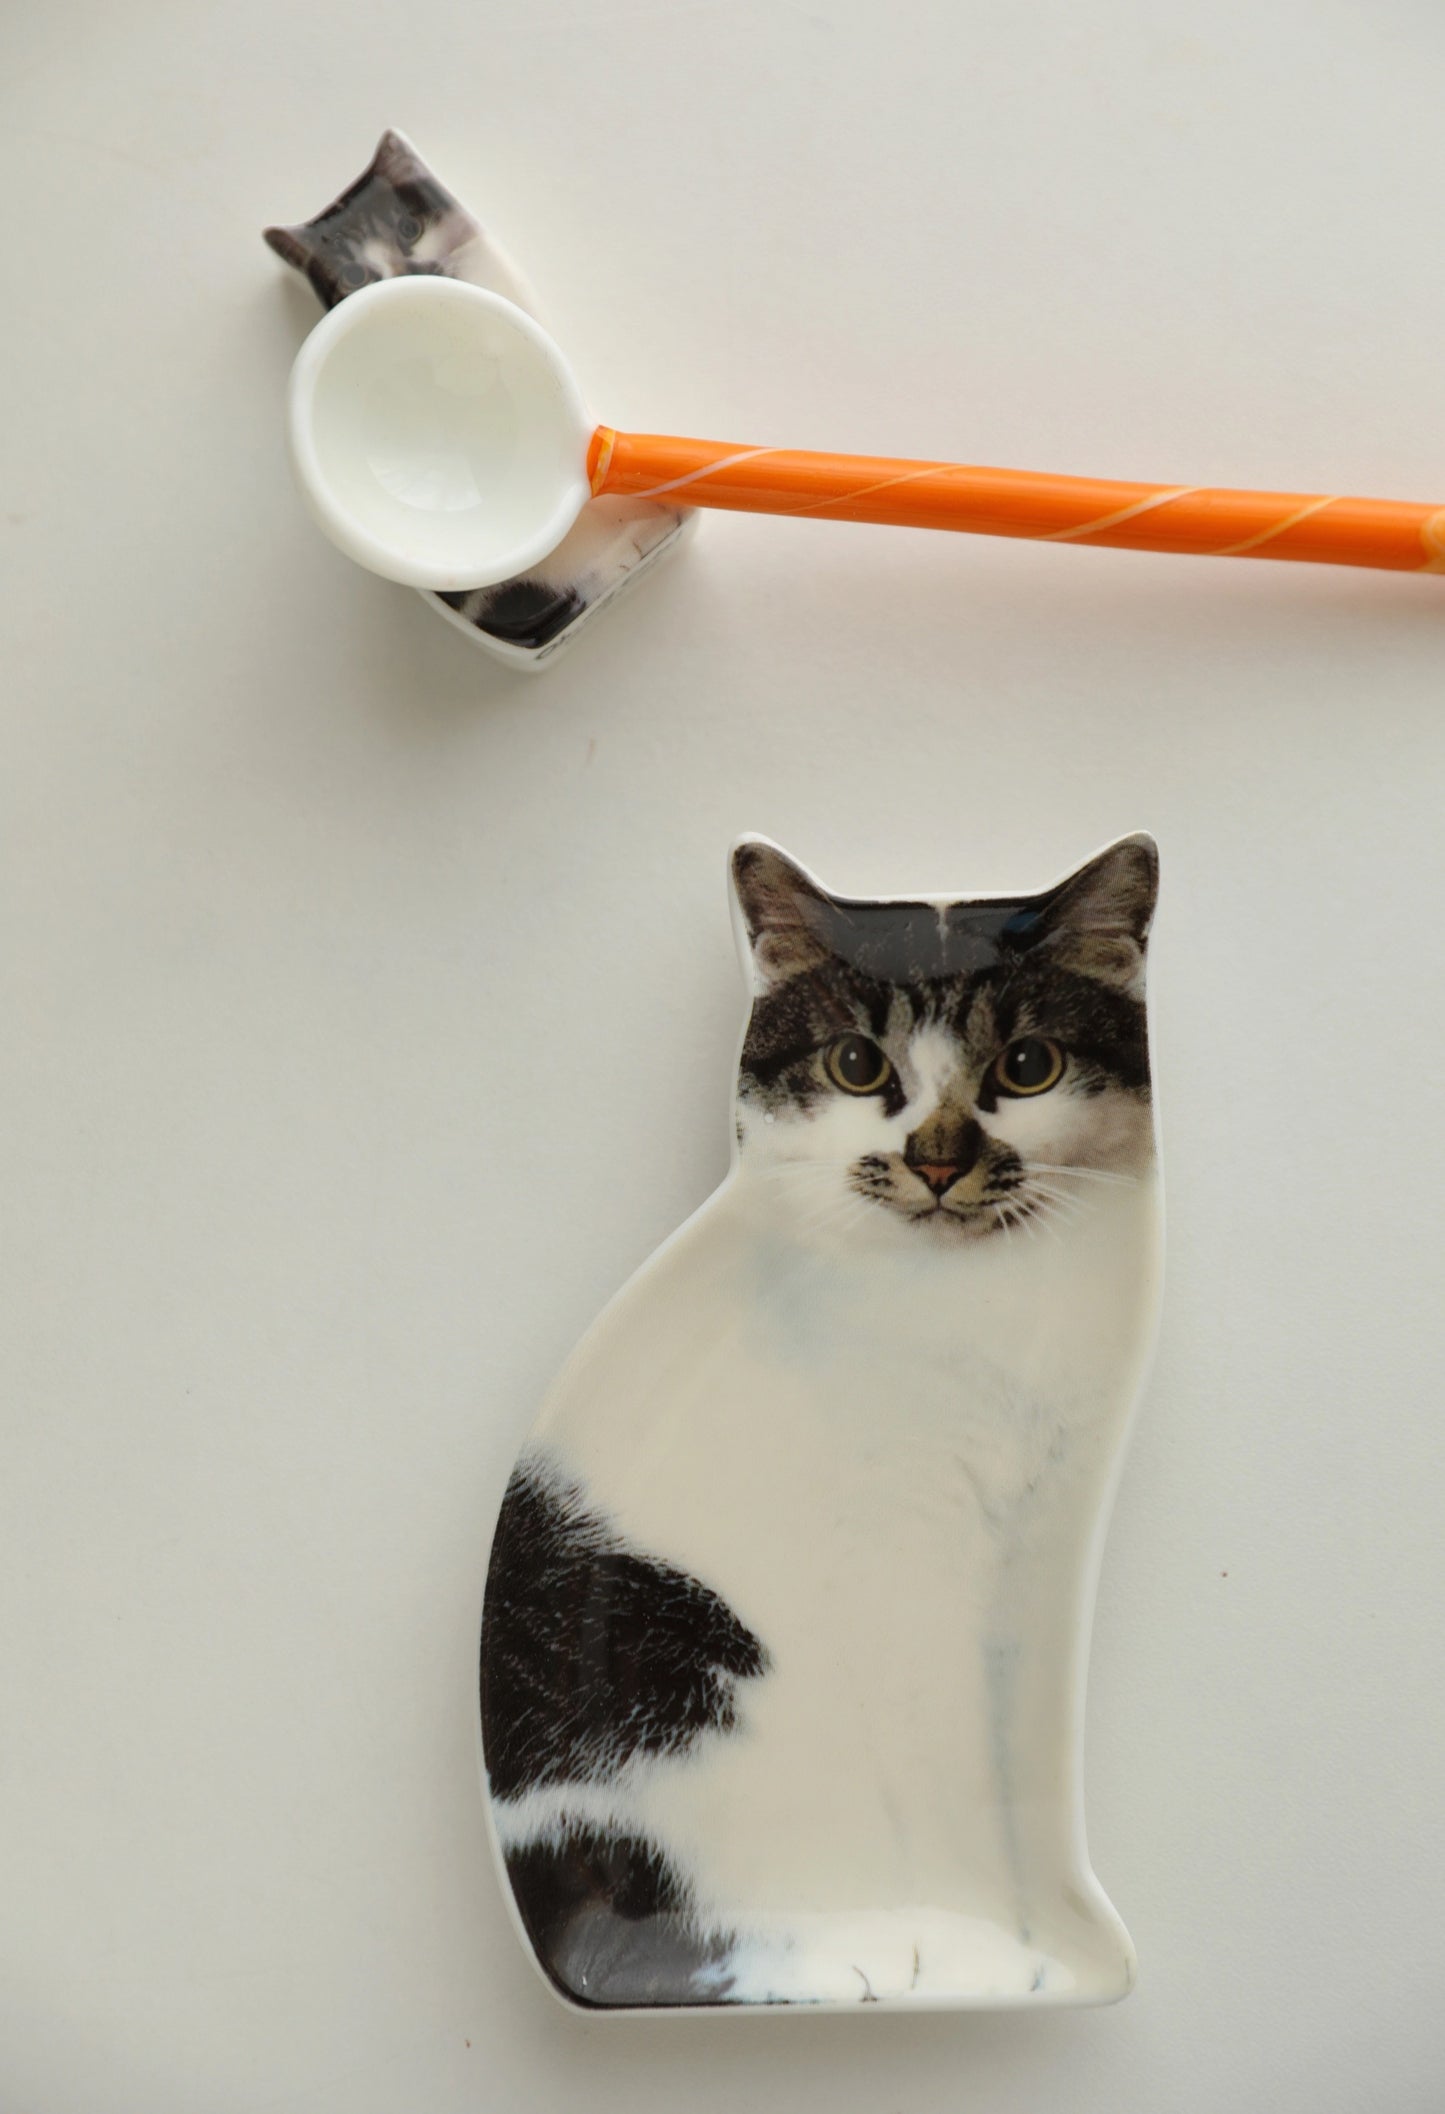 Cat-themed Dish and Chopstick Holder